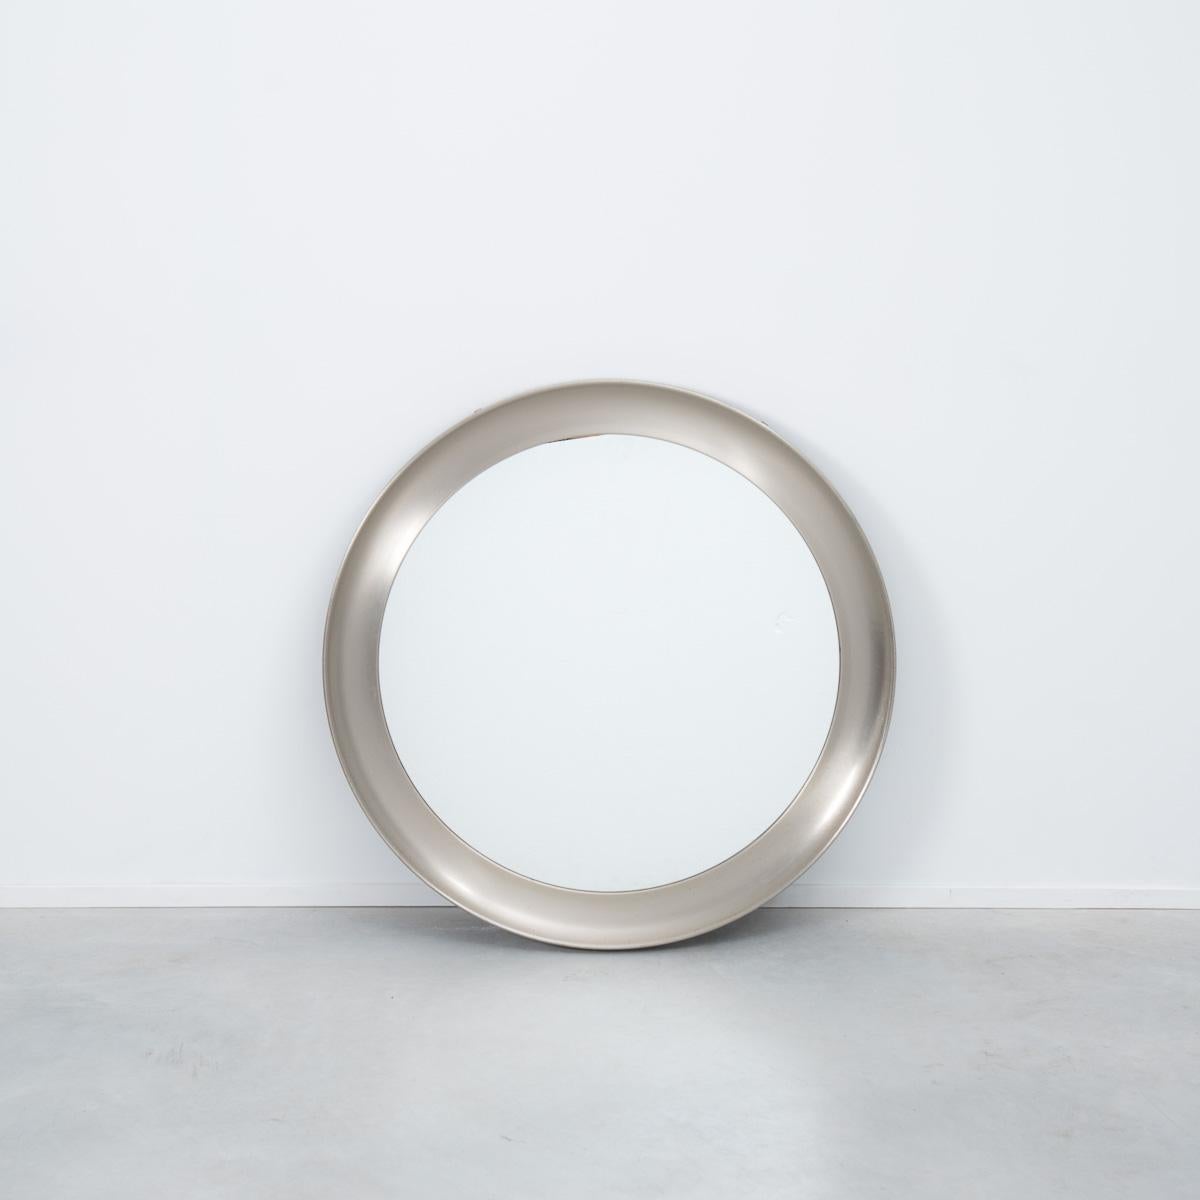 Named after the Greek god ‘Narcissus’, who became infatuated with his reflection, this simplistic beauty of this piece resonates in its simplicity.
Sergio Mazza was born in Milan in 1931. He studied architecture and eventually opened his practice